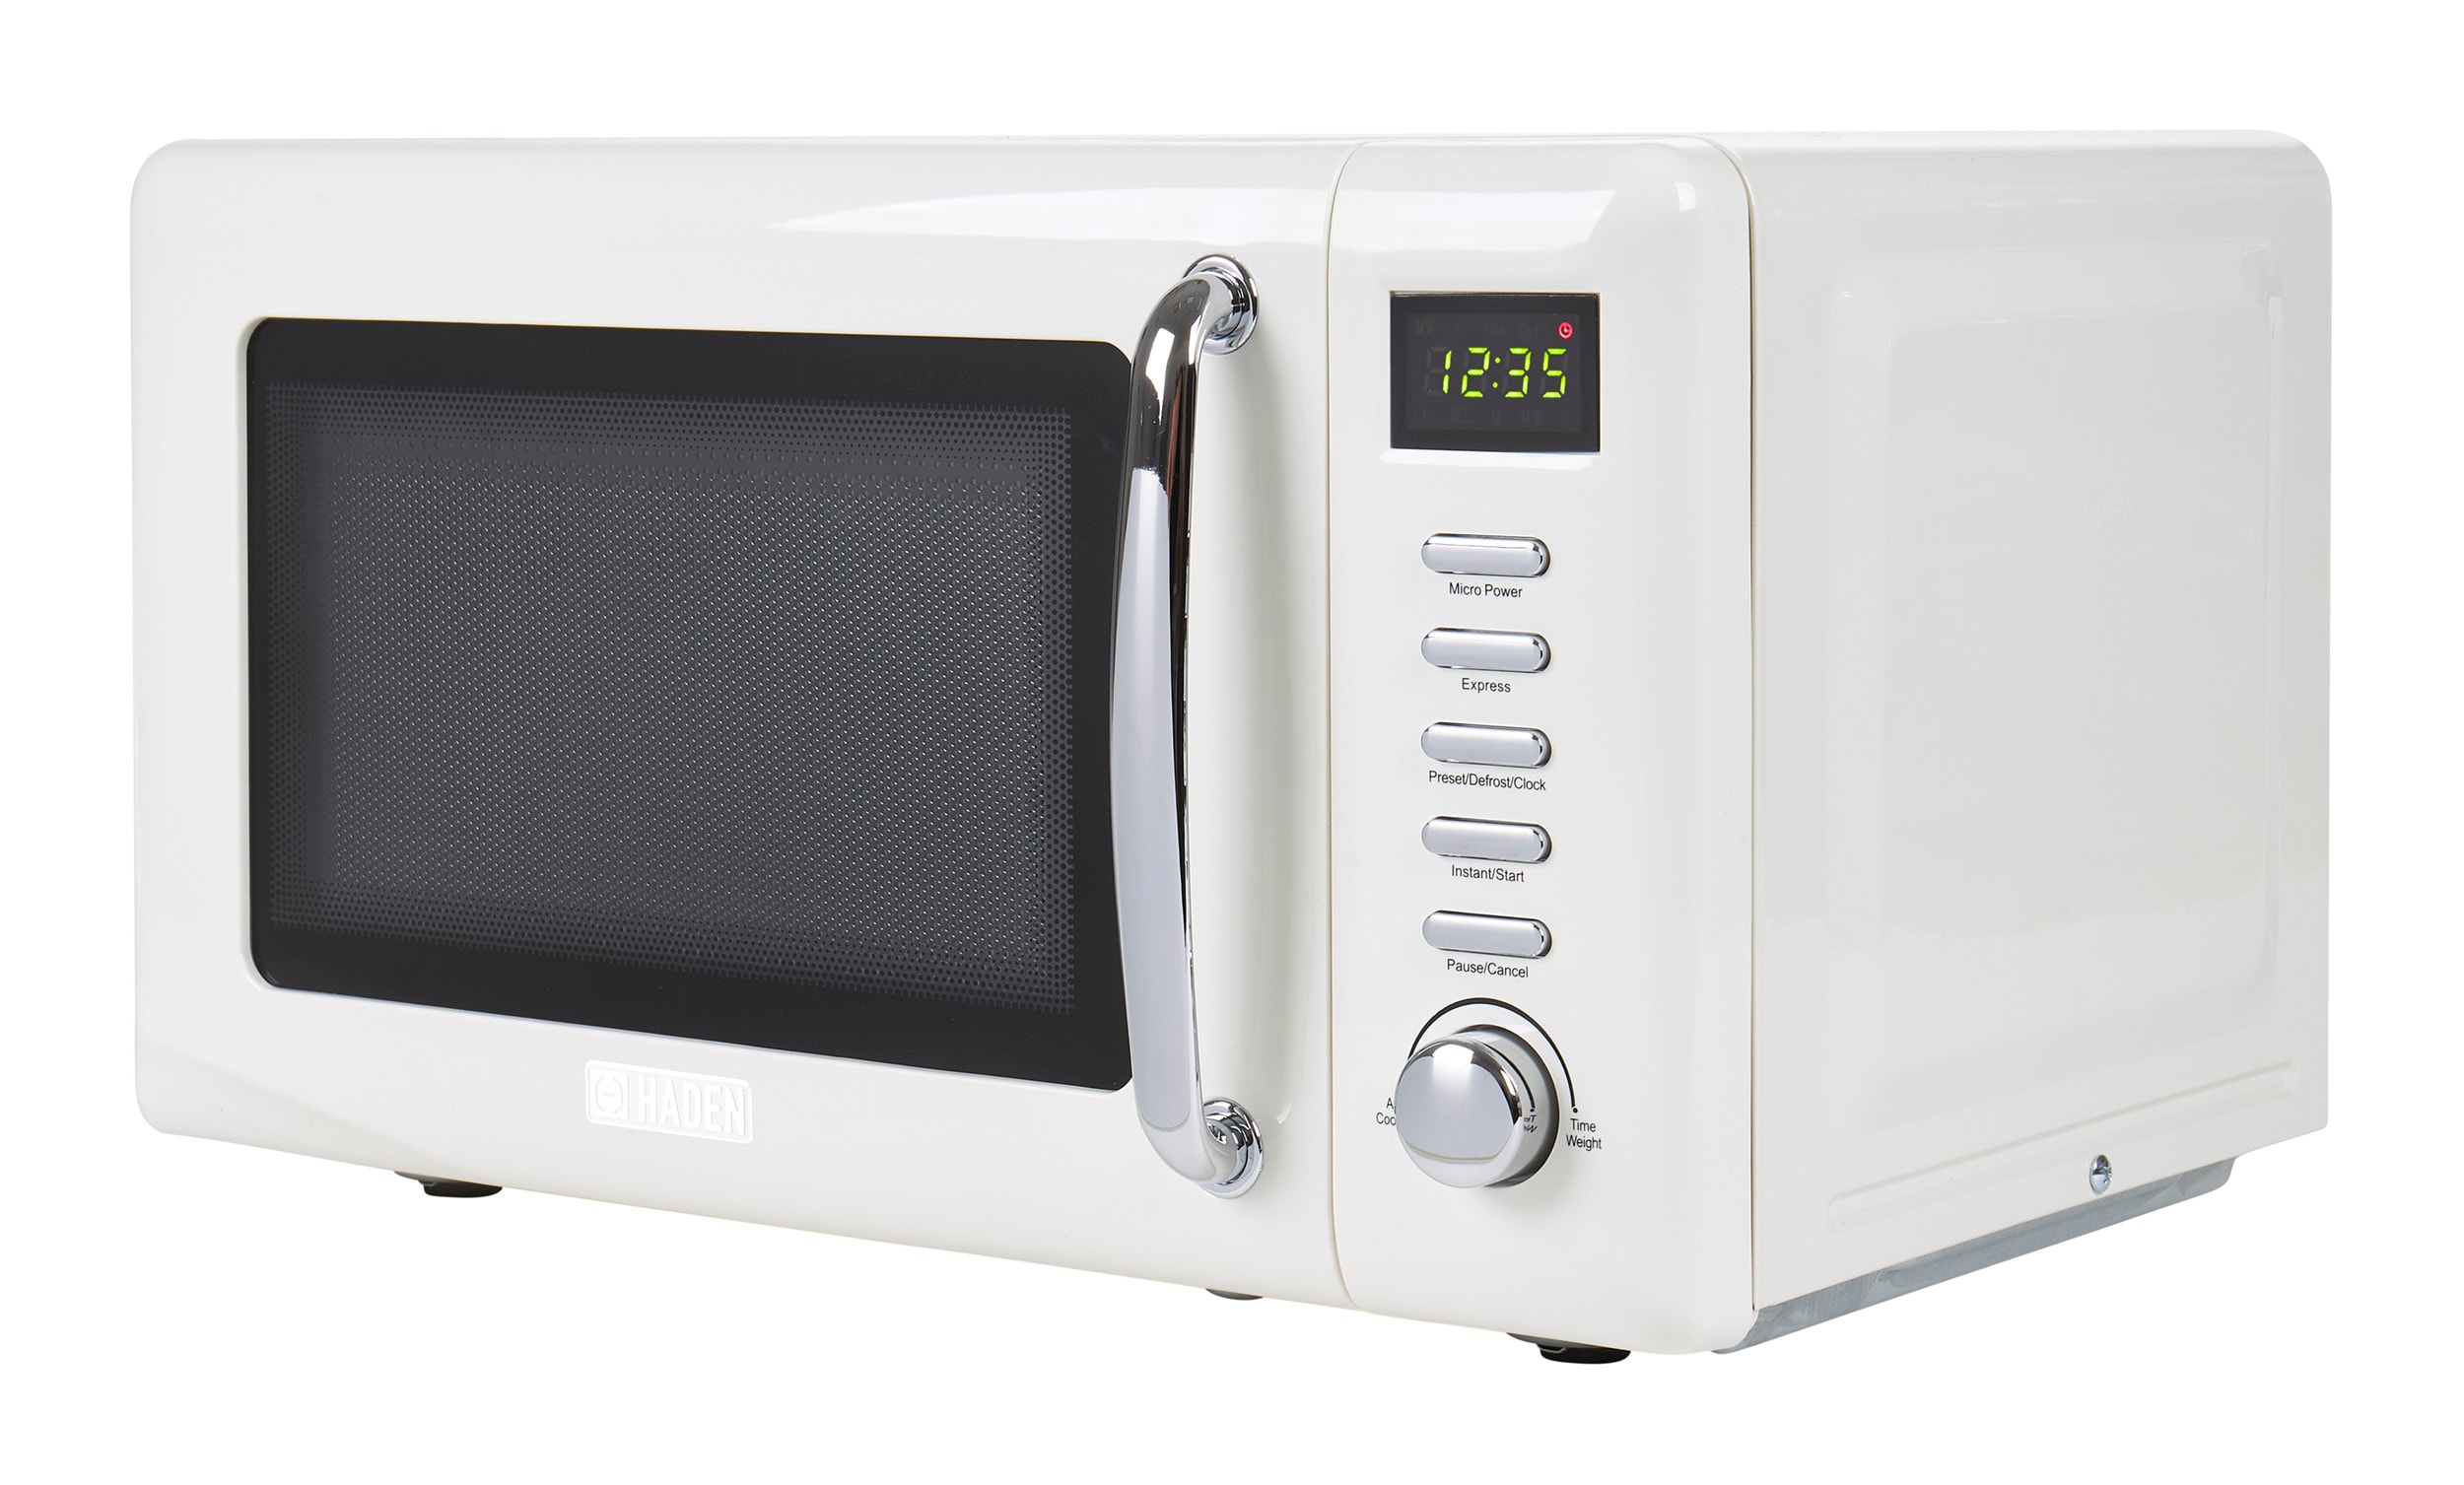 Avanti MT7V0W 18 Inch Countertop Microwave Oven with 0.7 cu. ft. Capacity,  700 Watts, Electronic Control Panel, 10 Microwave Power Levels, and Child  Safety Lock: White